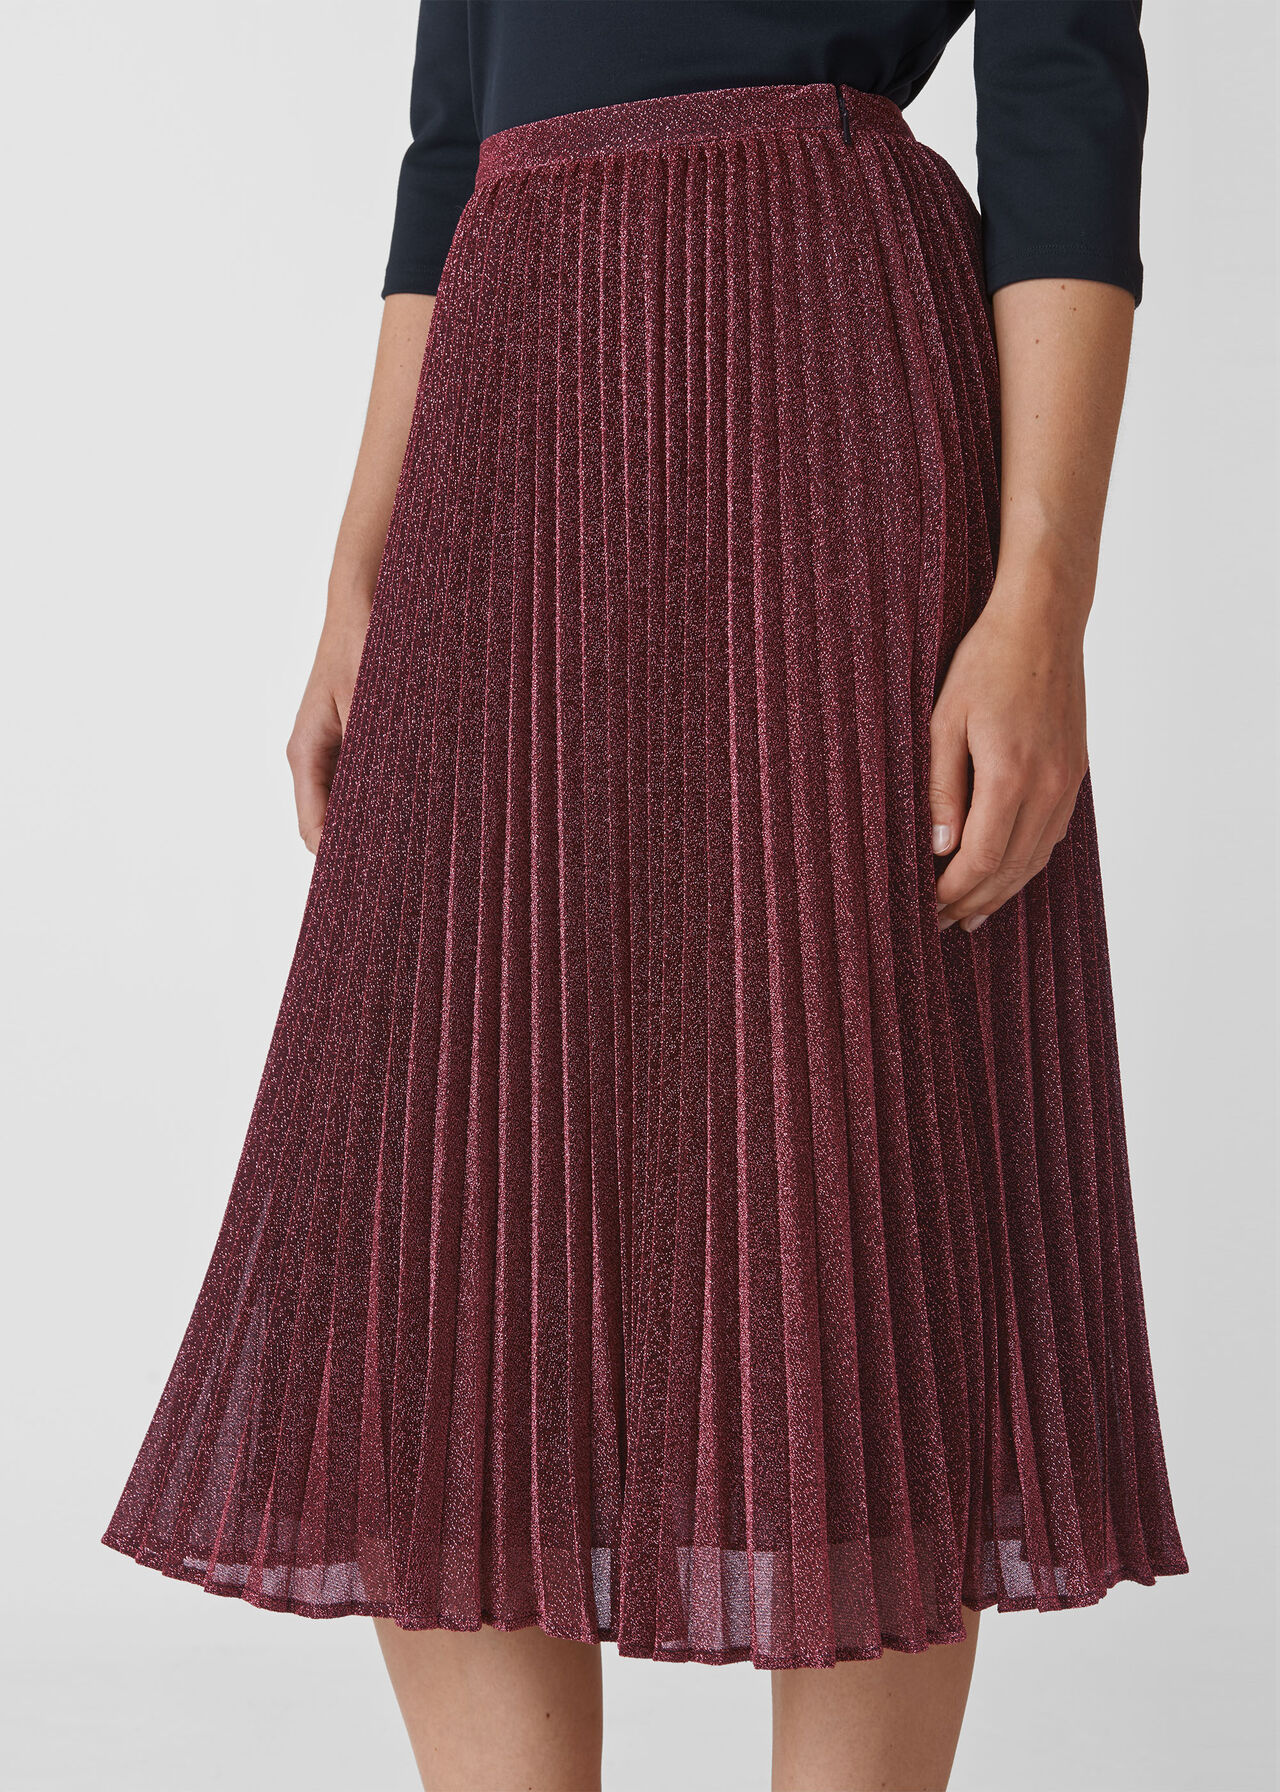 Pink Sparkle Pleated Skirt | WHISTLES